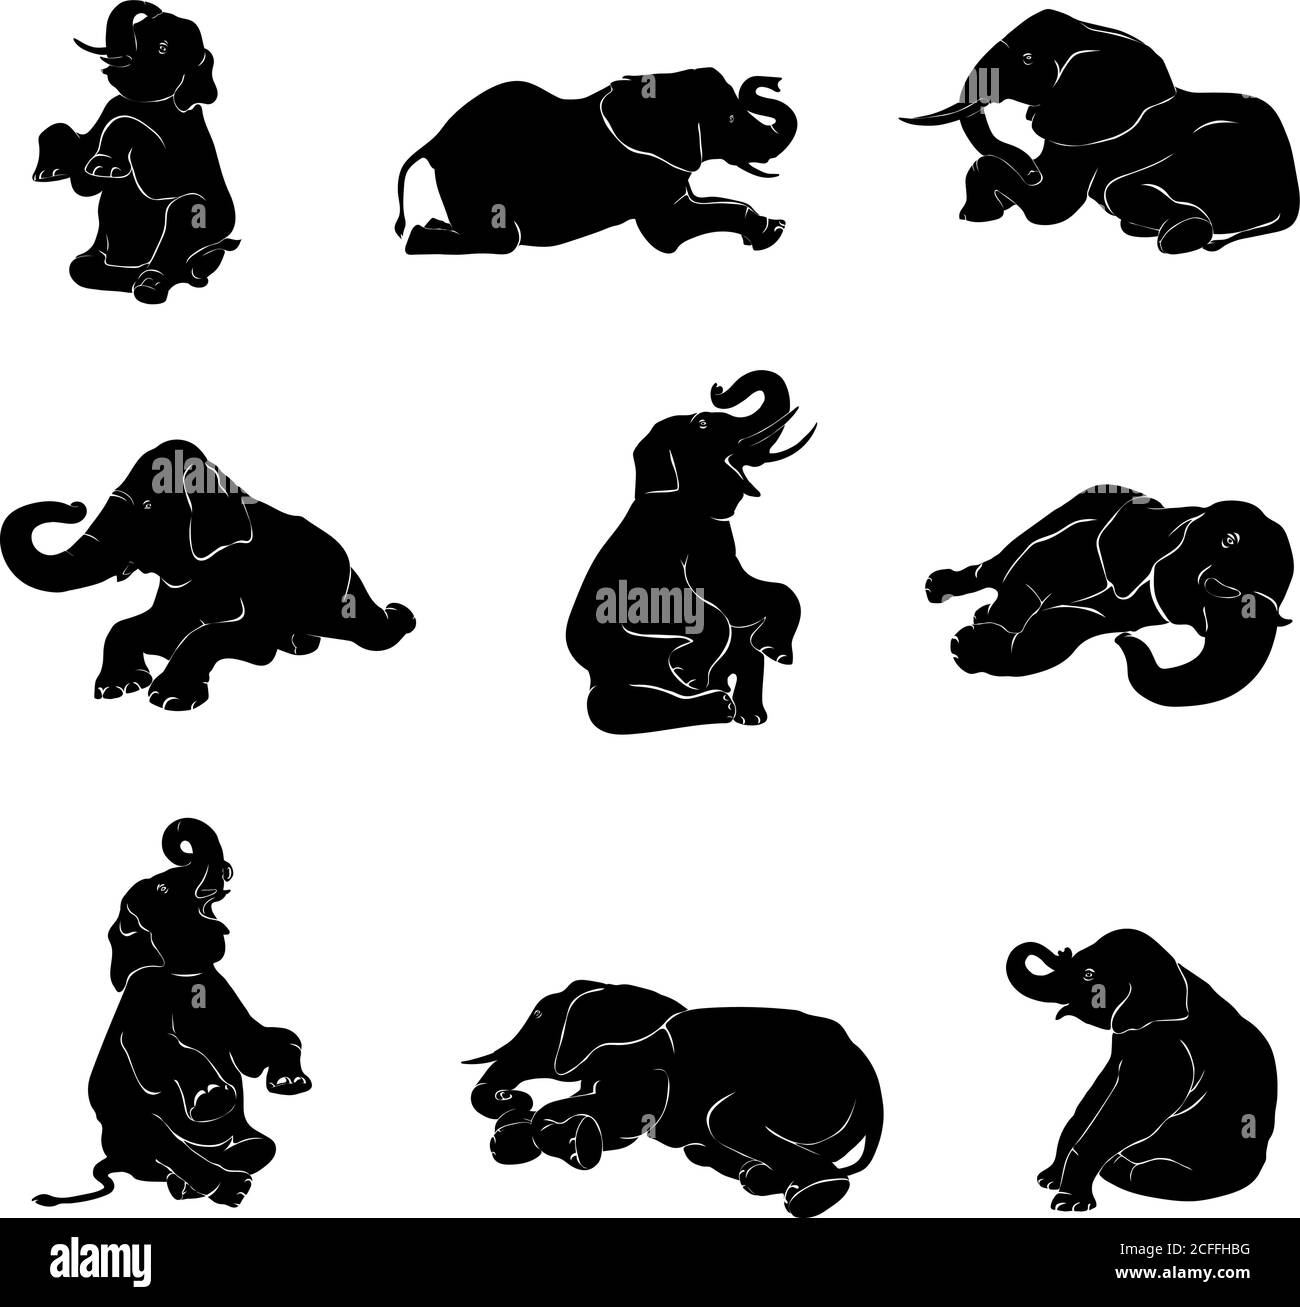 elephant, figure, vector, graphic, image, isolated, illustration, animal, zoo, head, trunk, ears, tusks, black, big, vector, graphic, silhouette Stock Vector